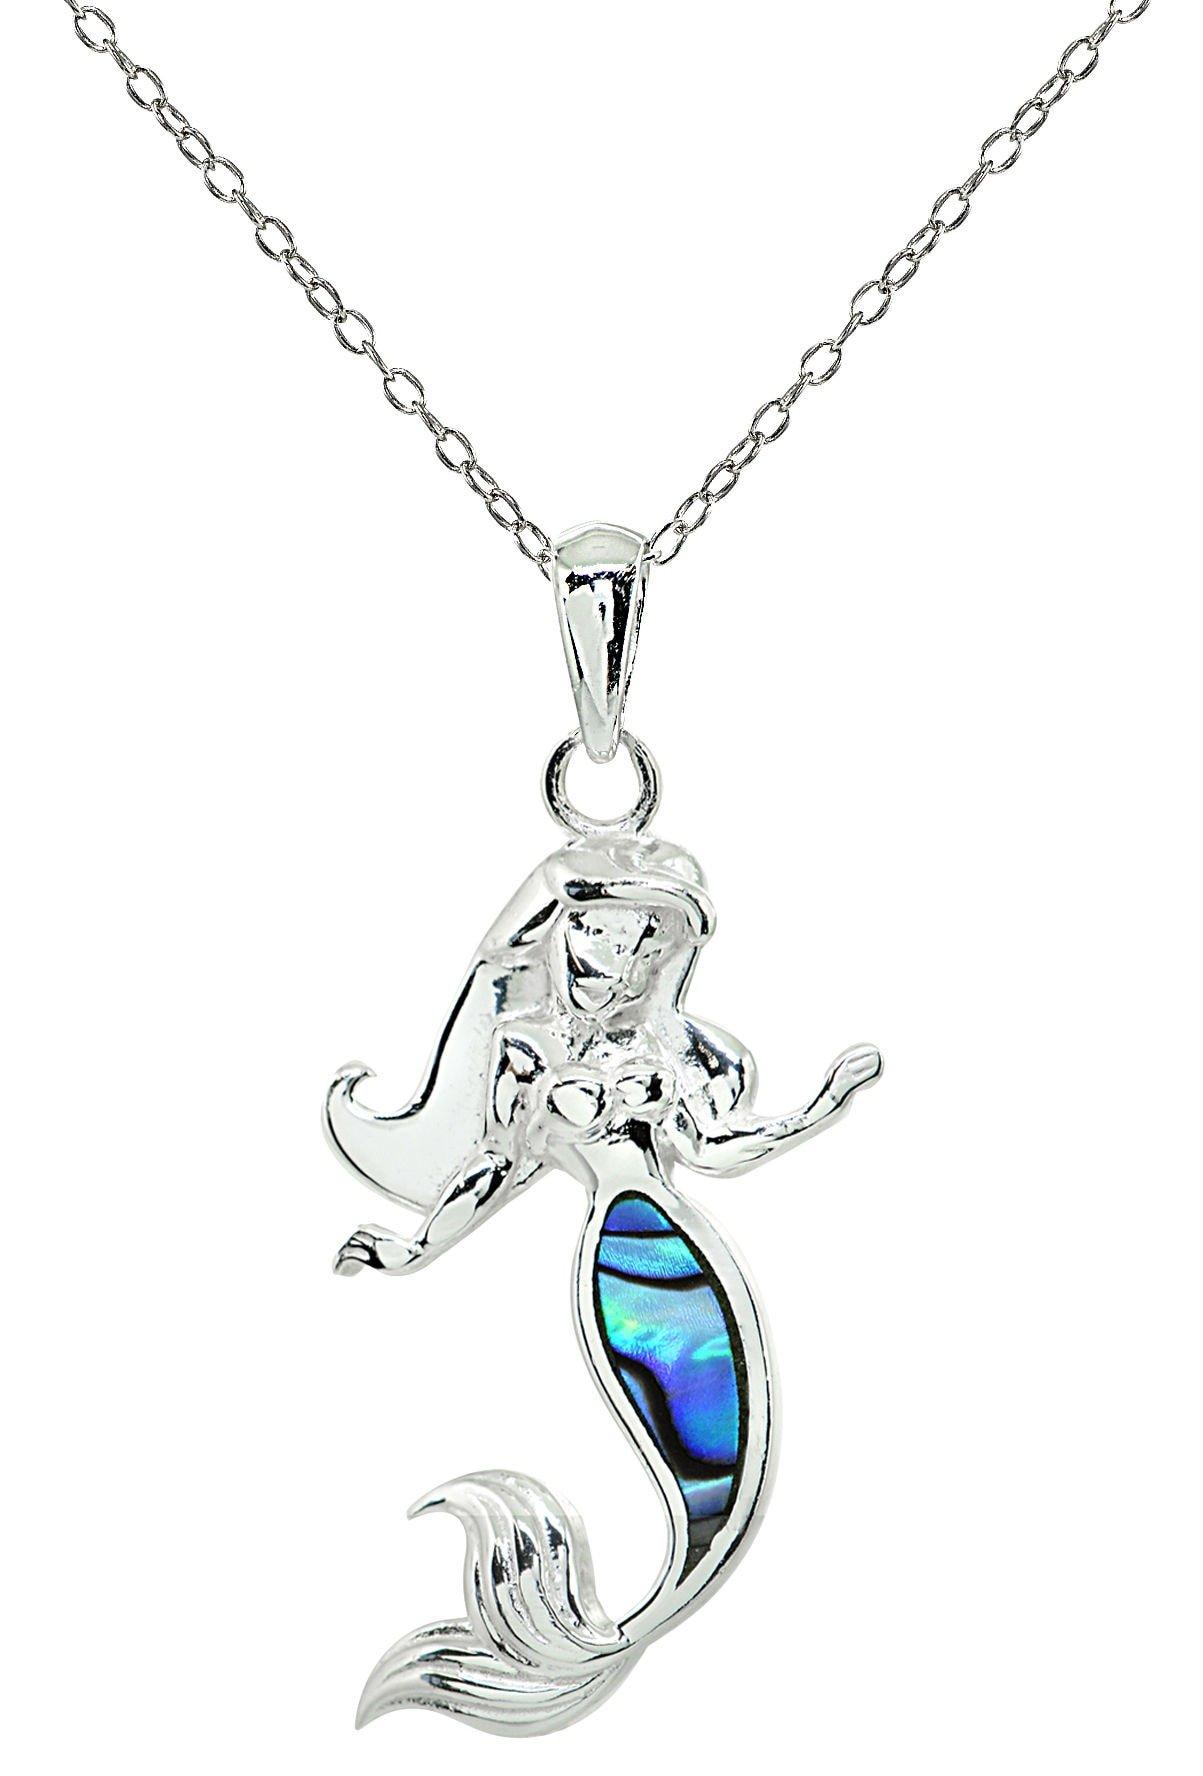 Silver Plated Abalone Mermaid Necklace